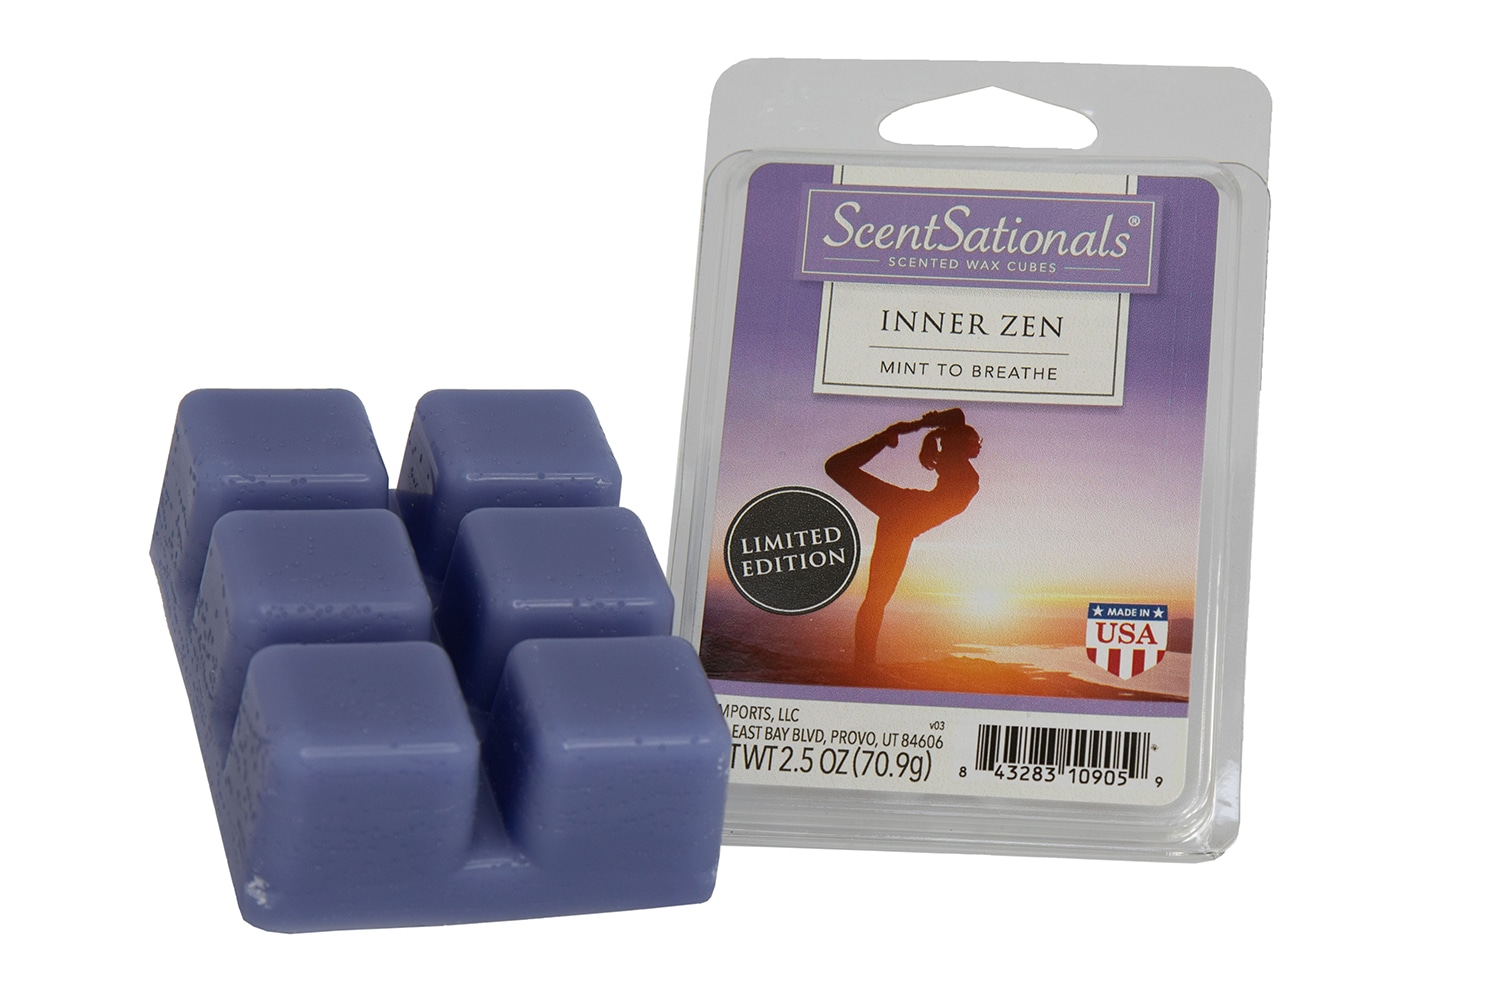 Illusion Scented Wax Melts, ScentSationals, 5 oz (Value Size